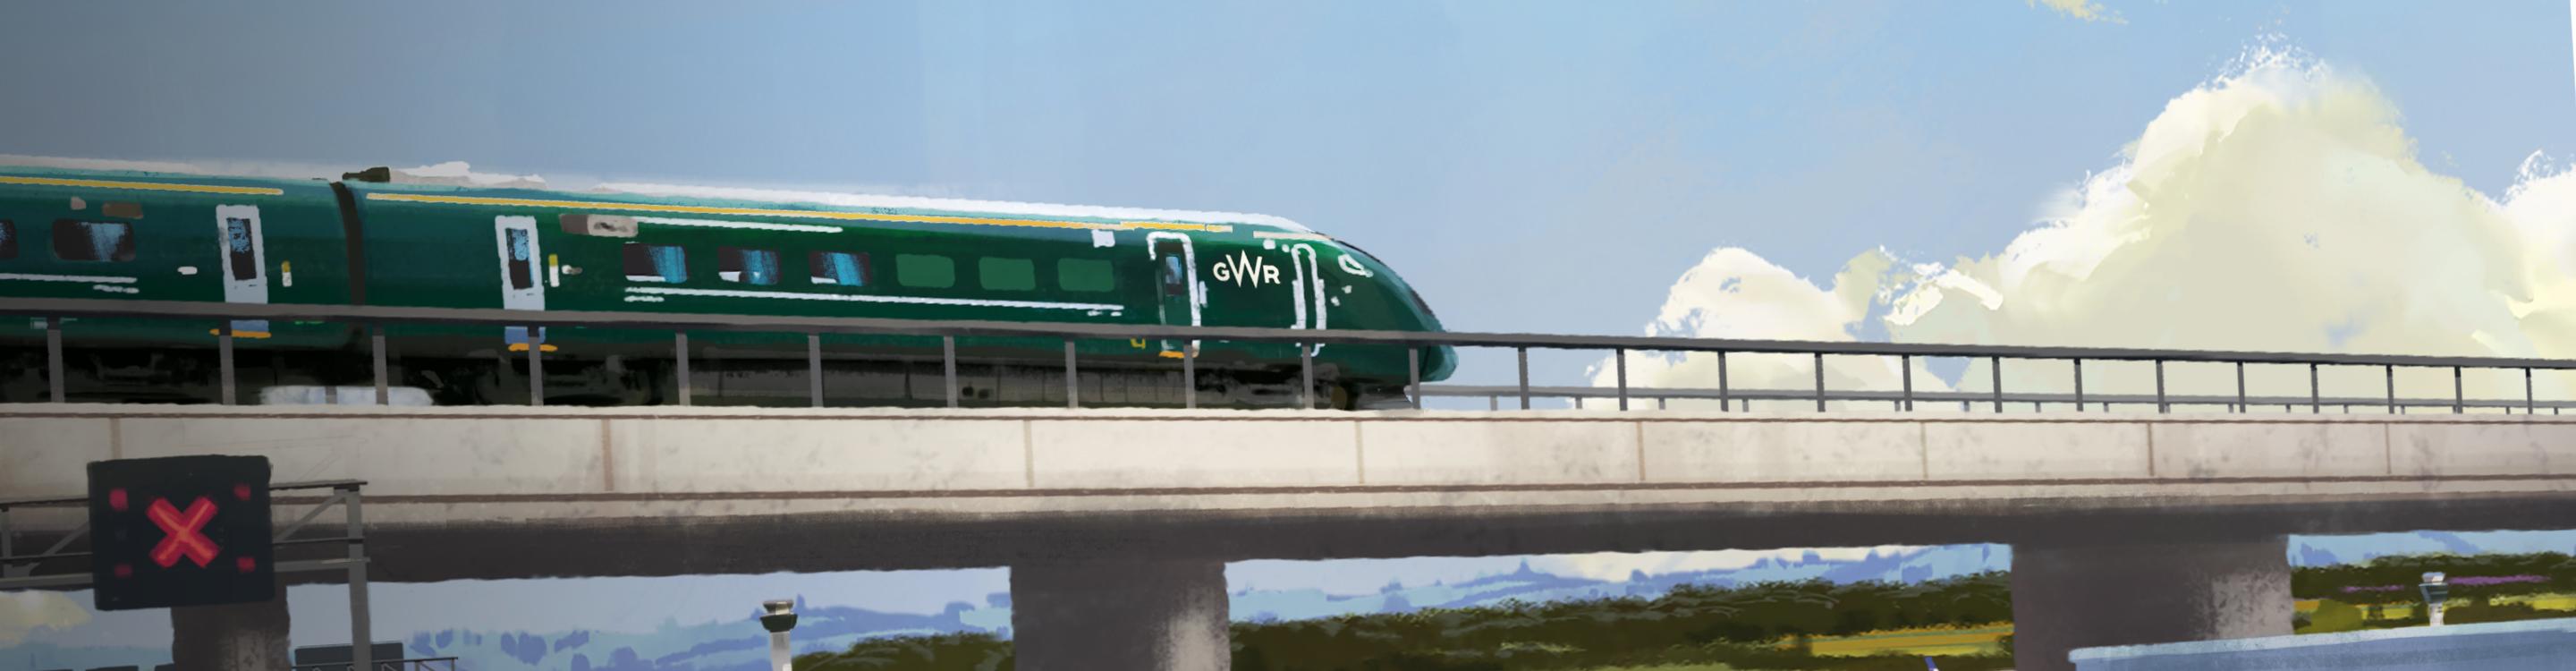 Graphic illustration of a GWR train travelling over a bridge